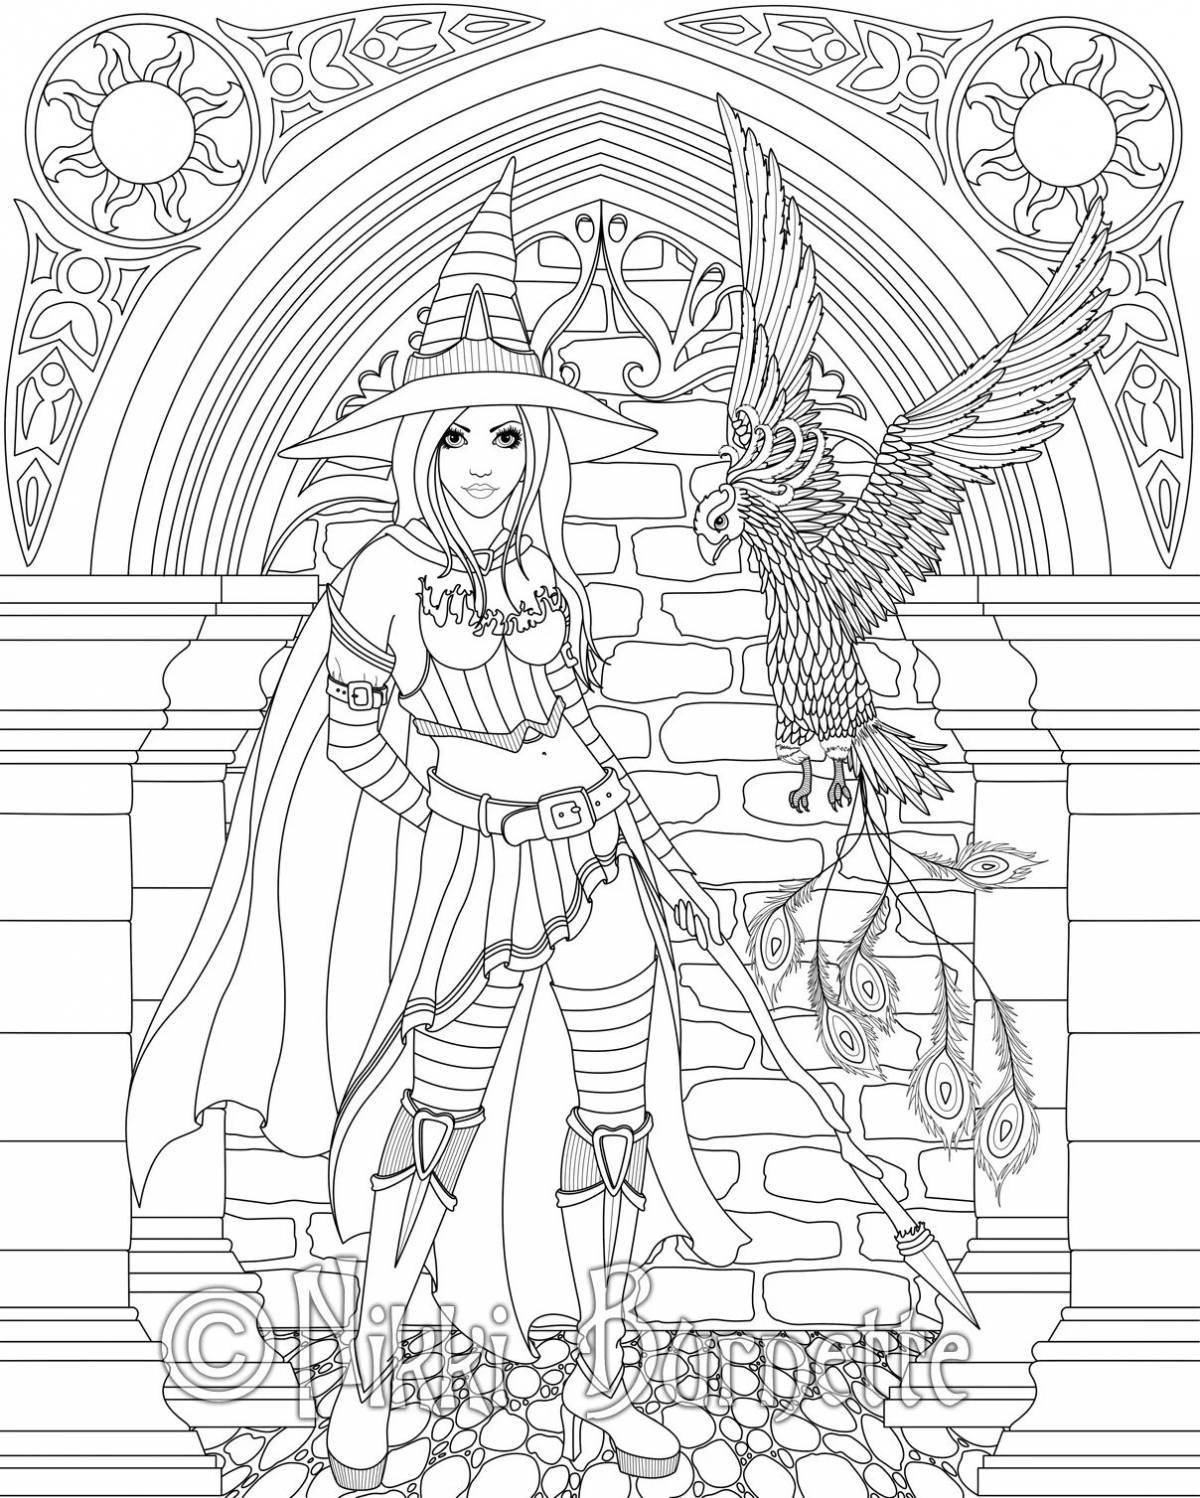 Coloring book grand aya and the witch